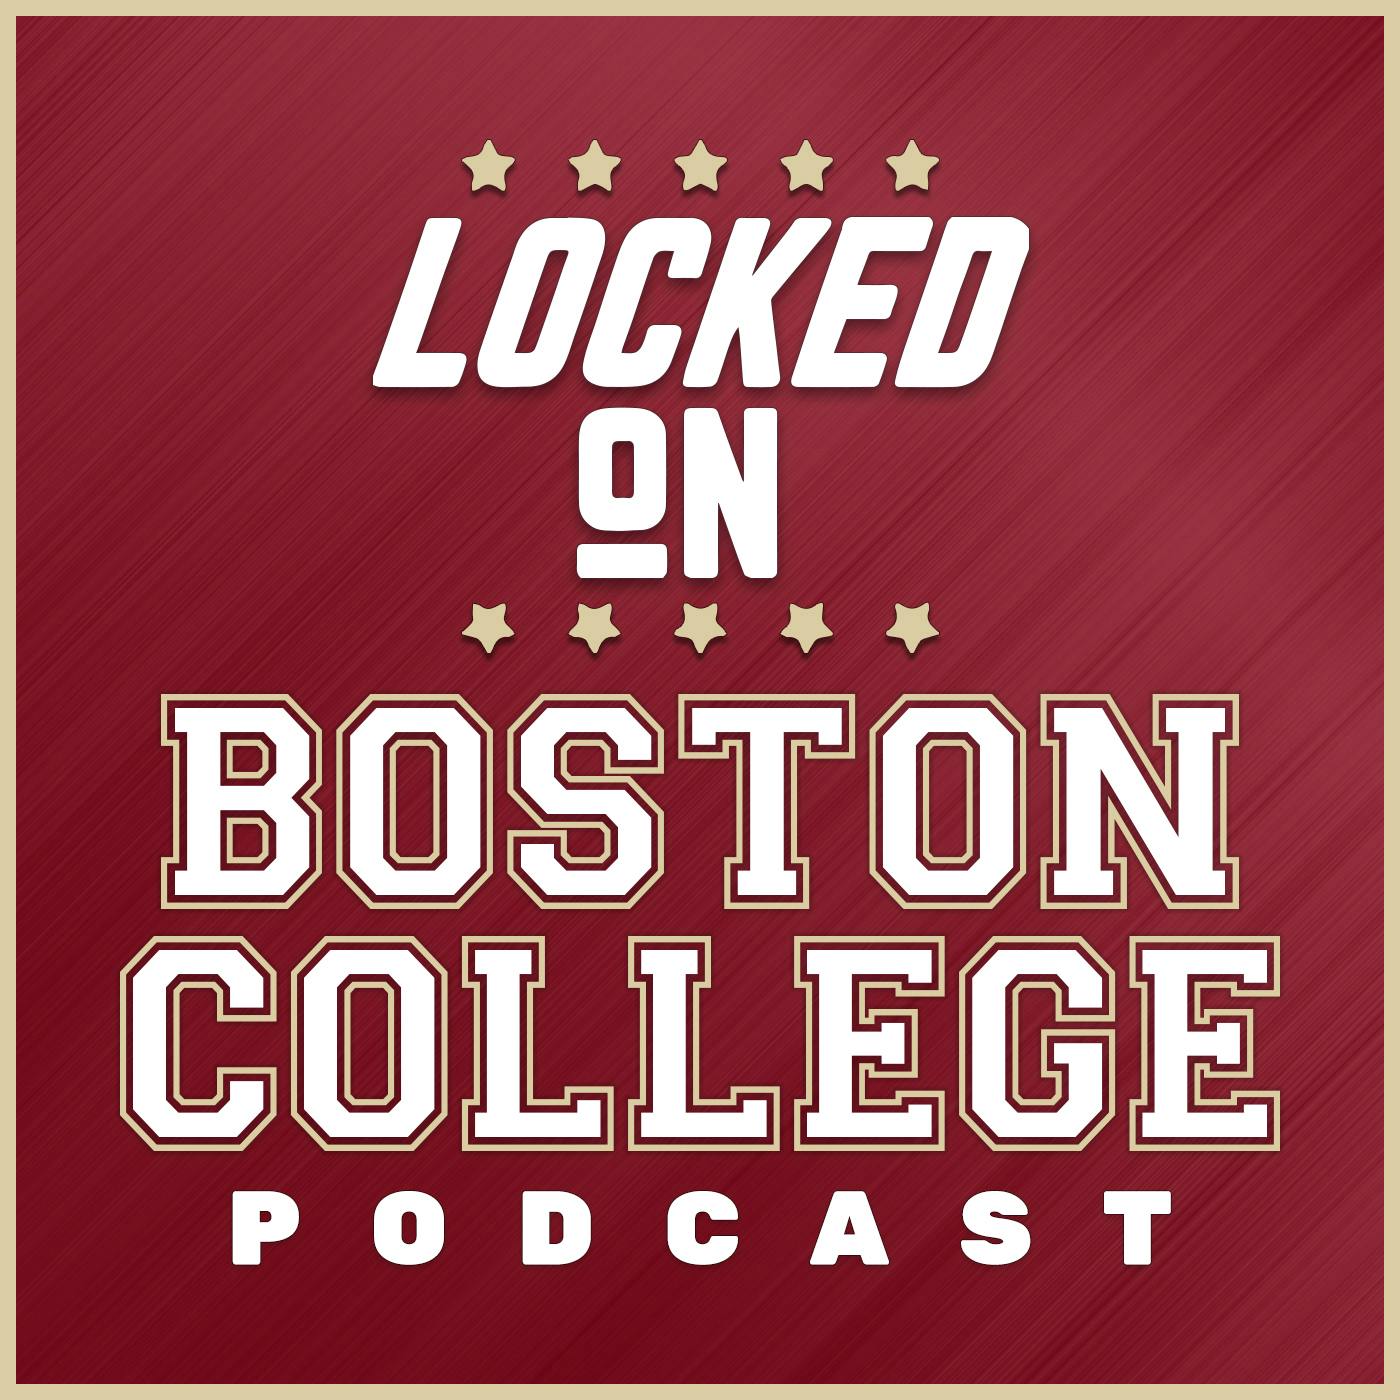 Who Will Be The #2 Wide Receiver for Boston College?